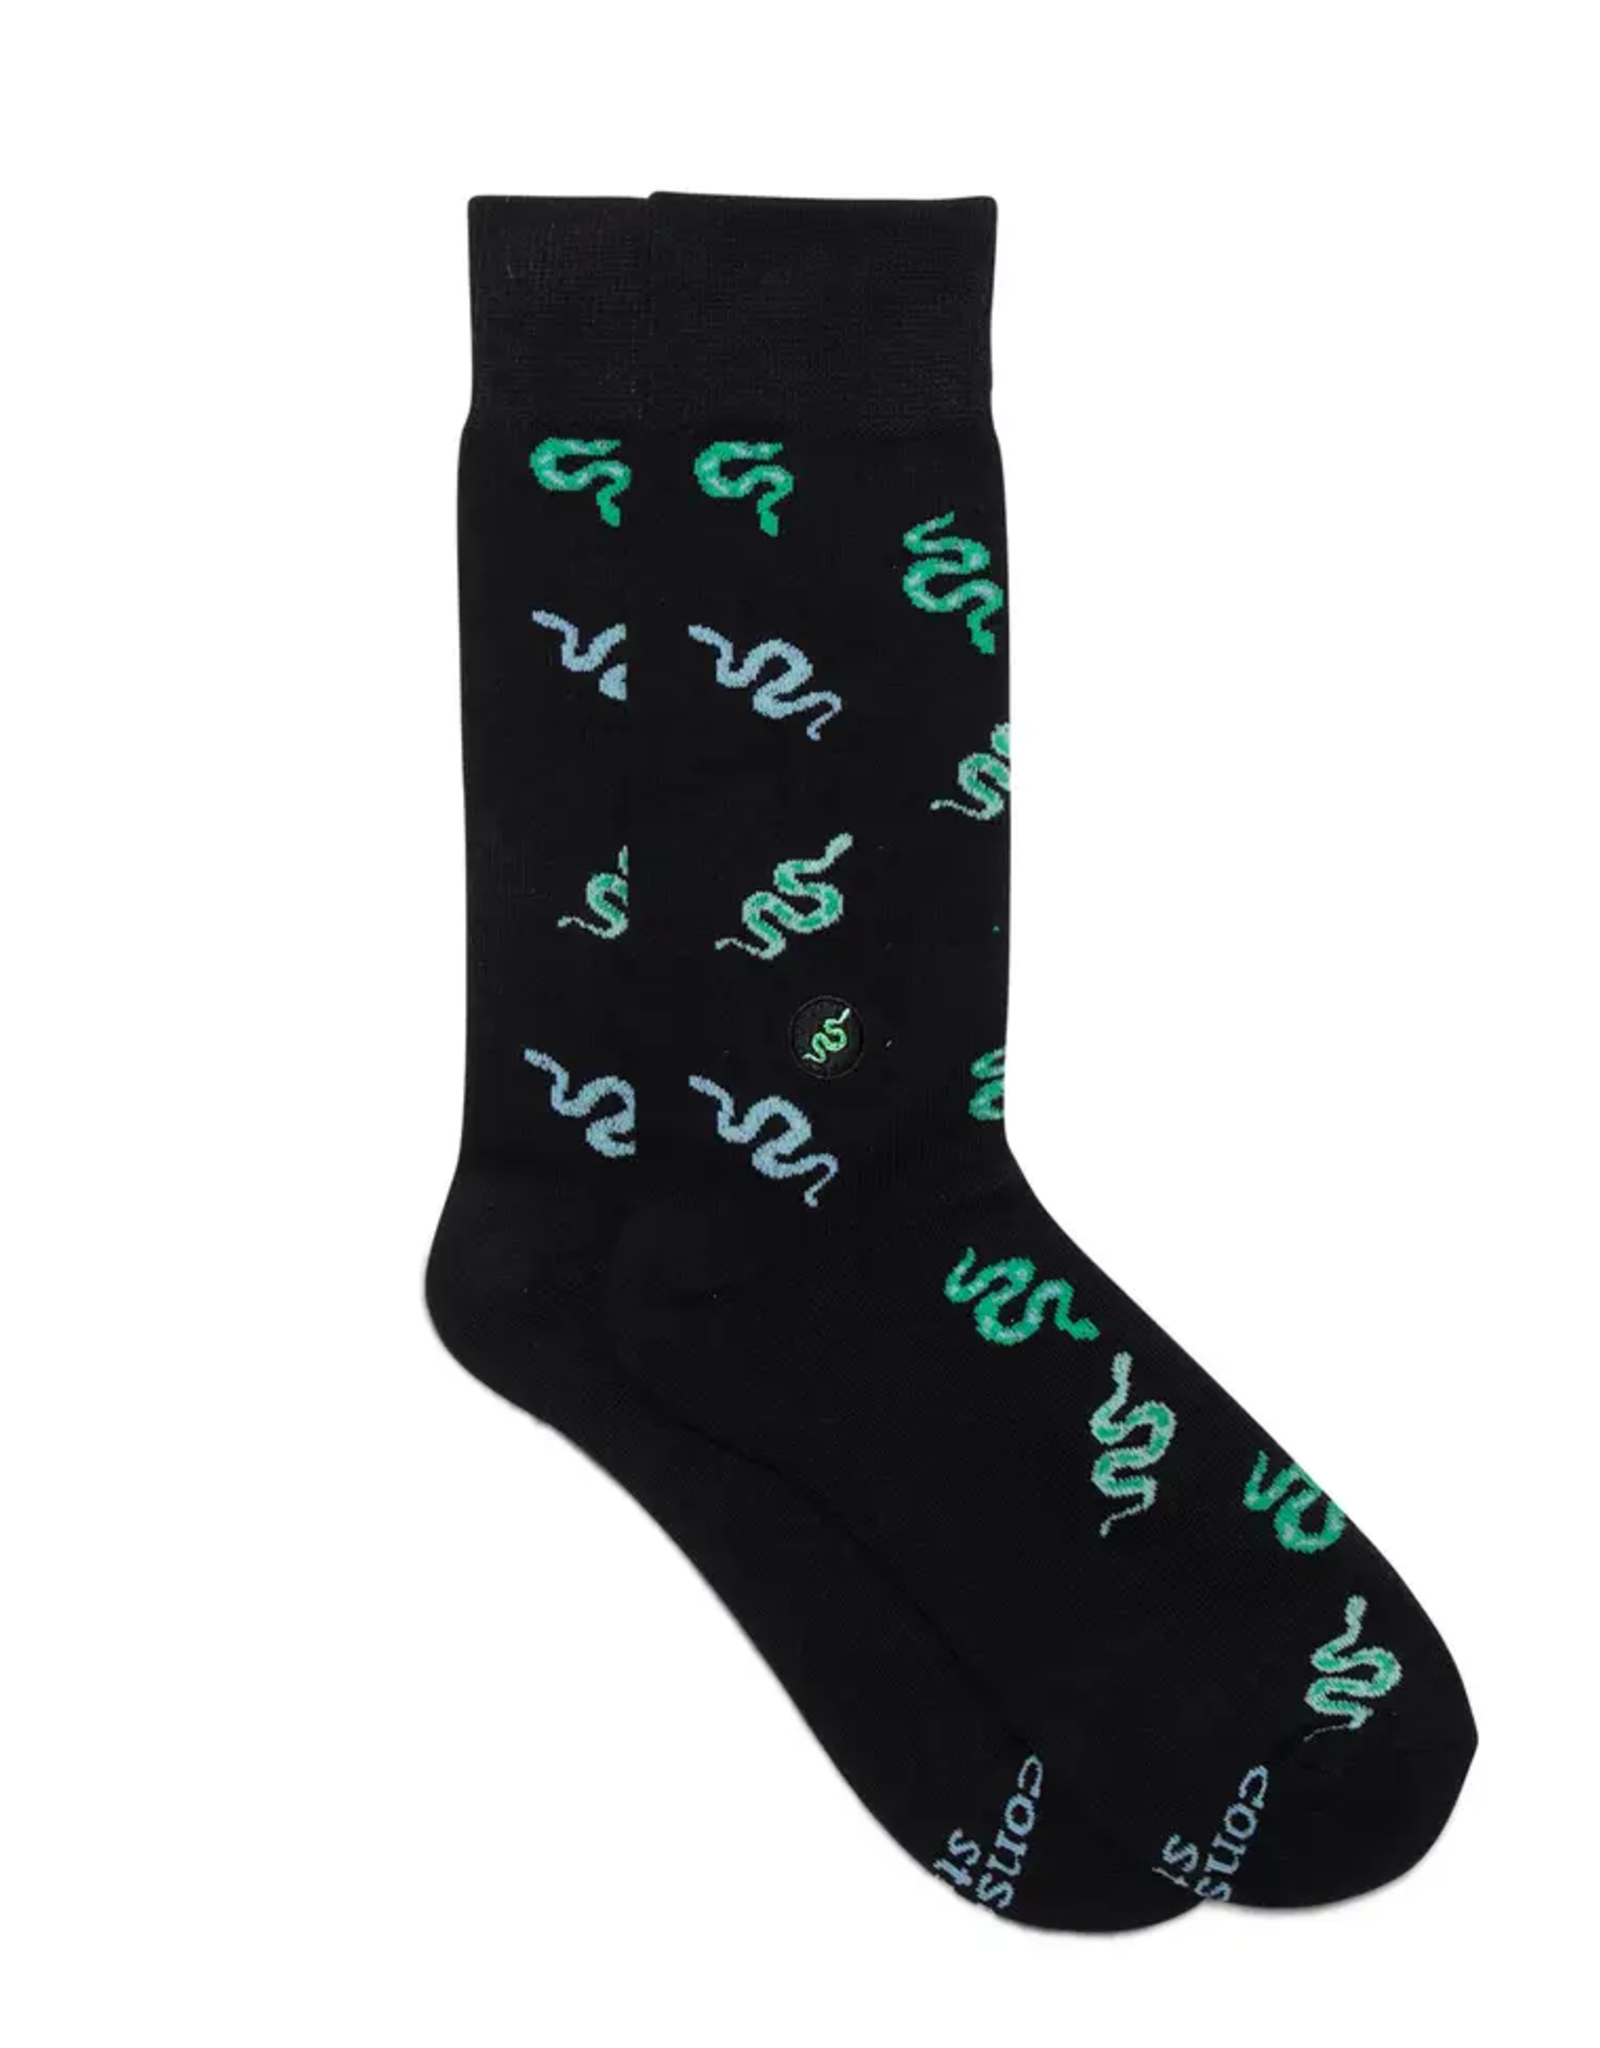 Socks that Protect Tropical Rainforest, Snakes, India